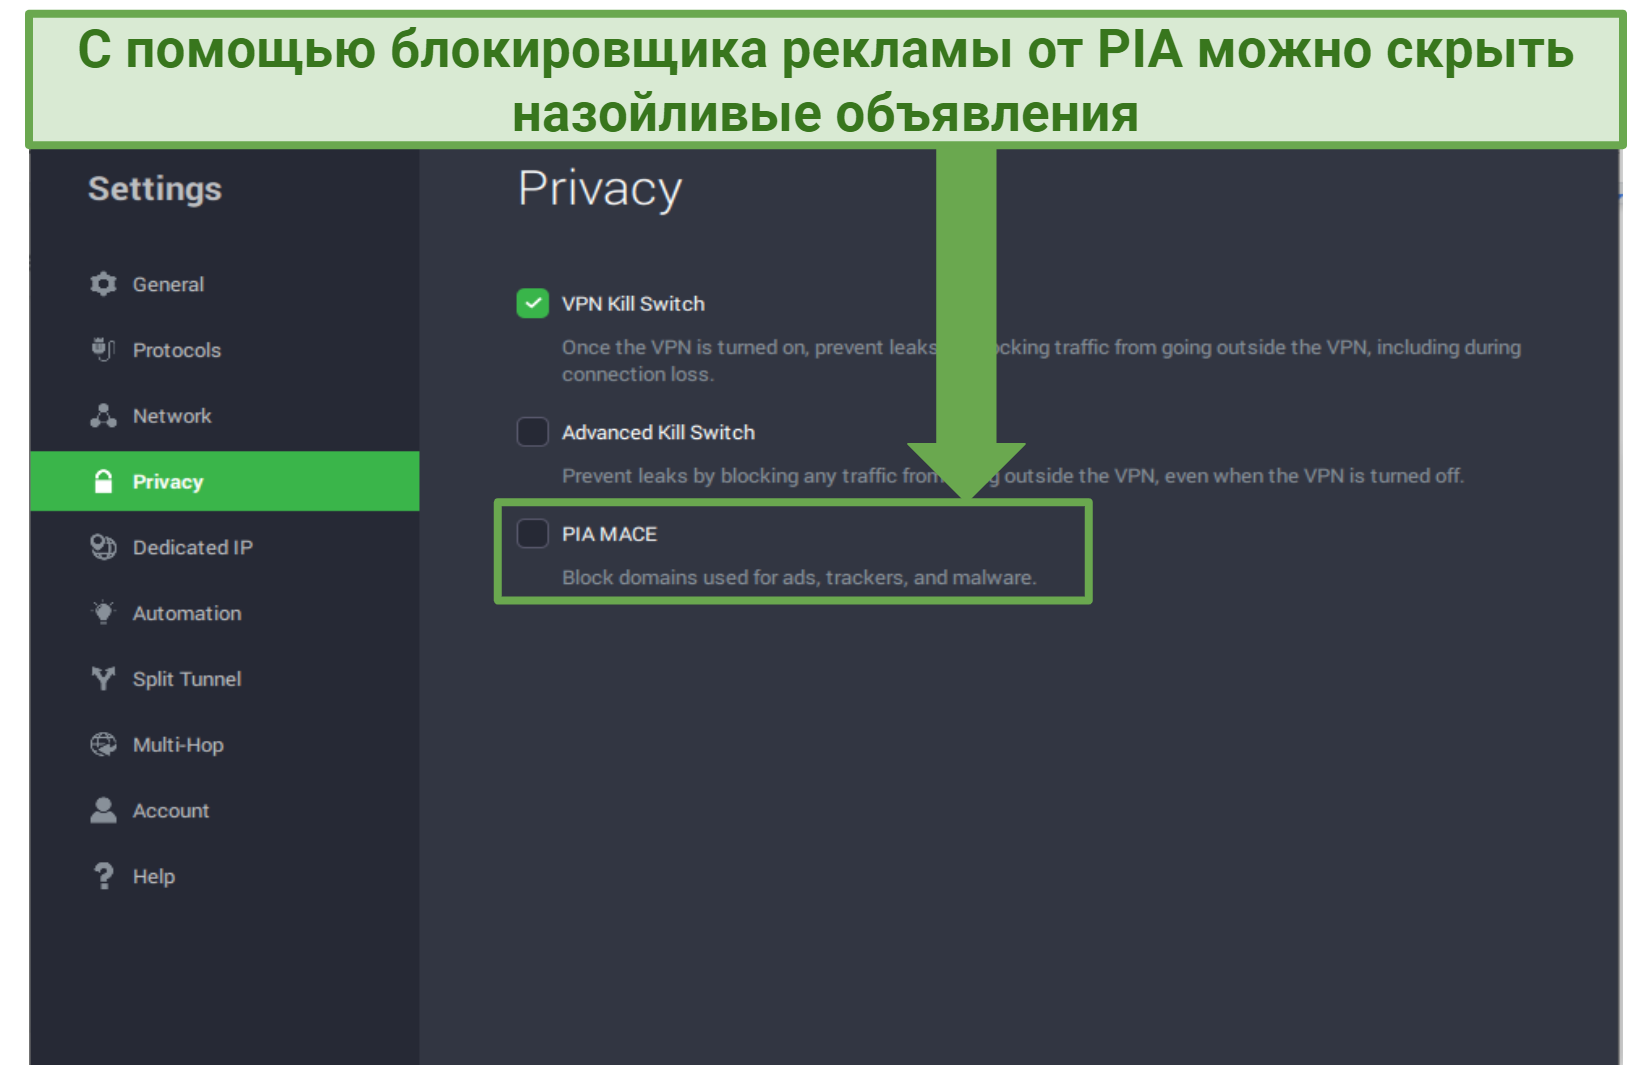 Screenshot of PIA's interface showing the PIA MACE option to block ads, trackers, and malware.